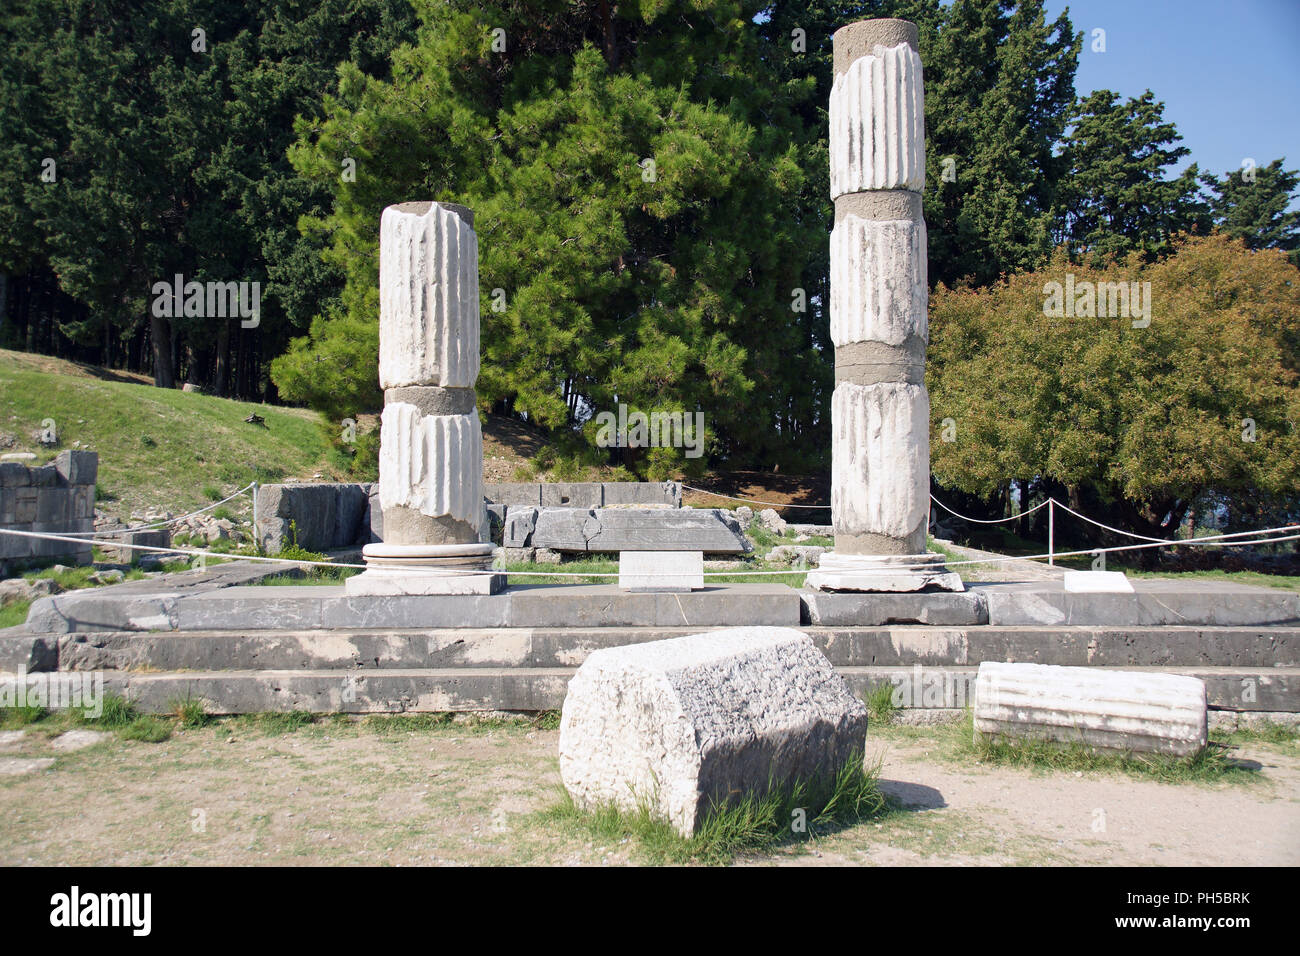 Archaeological place in Greece Stock Photo